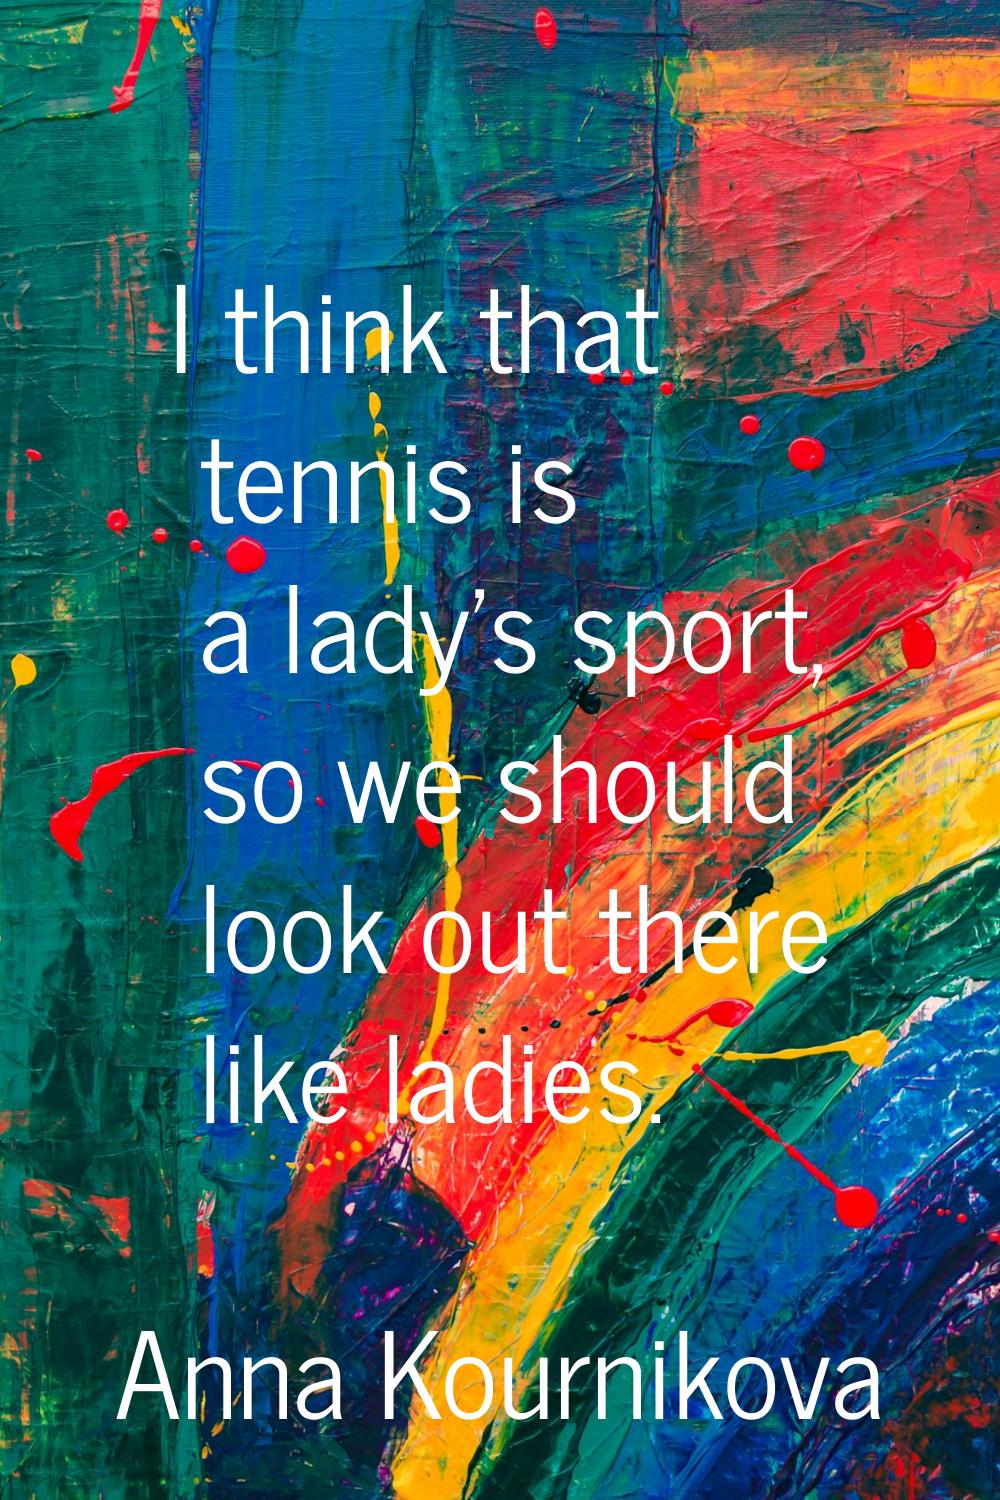 I think that tennis is a lady's sport, so we should look out there like ladies.